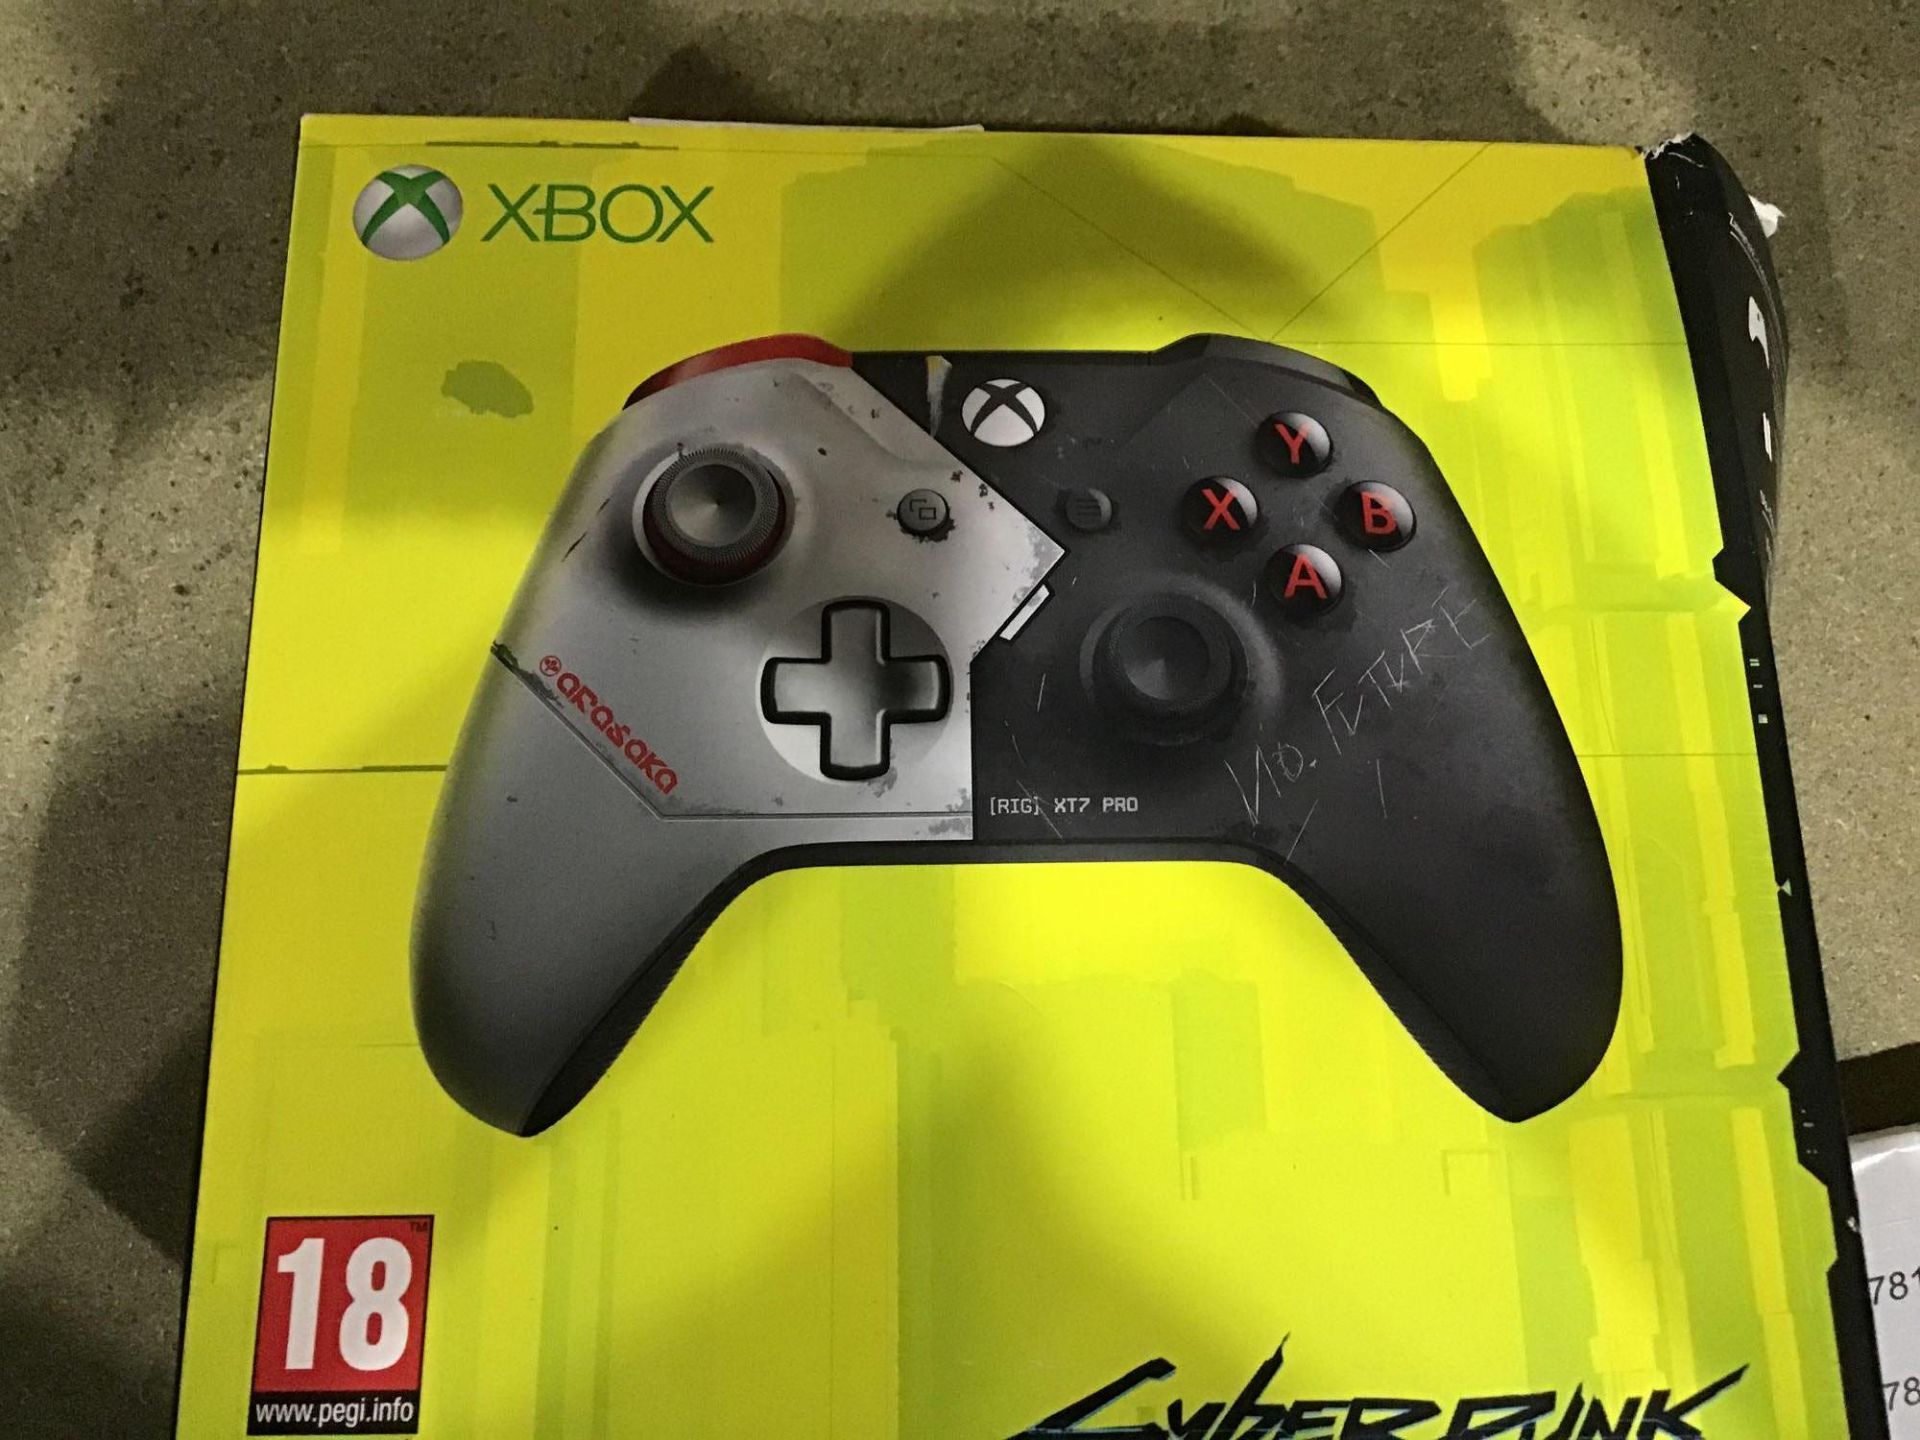 Official Xbox One Wireless Cyberpunk 2077 Controller 502/7686 £64.99 RRP - Image 2 of 4